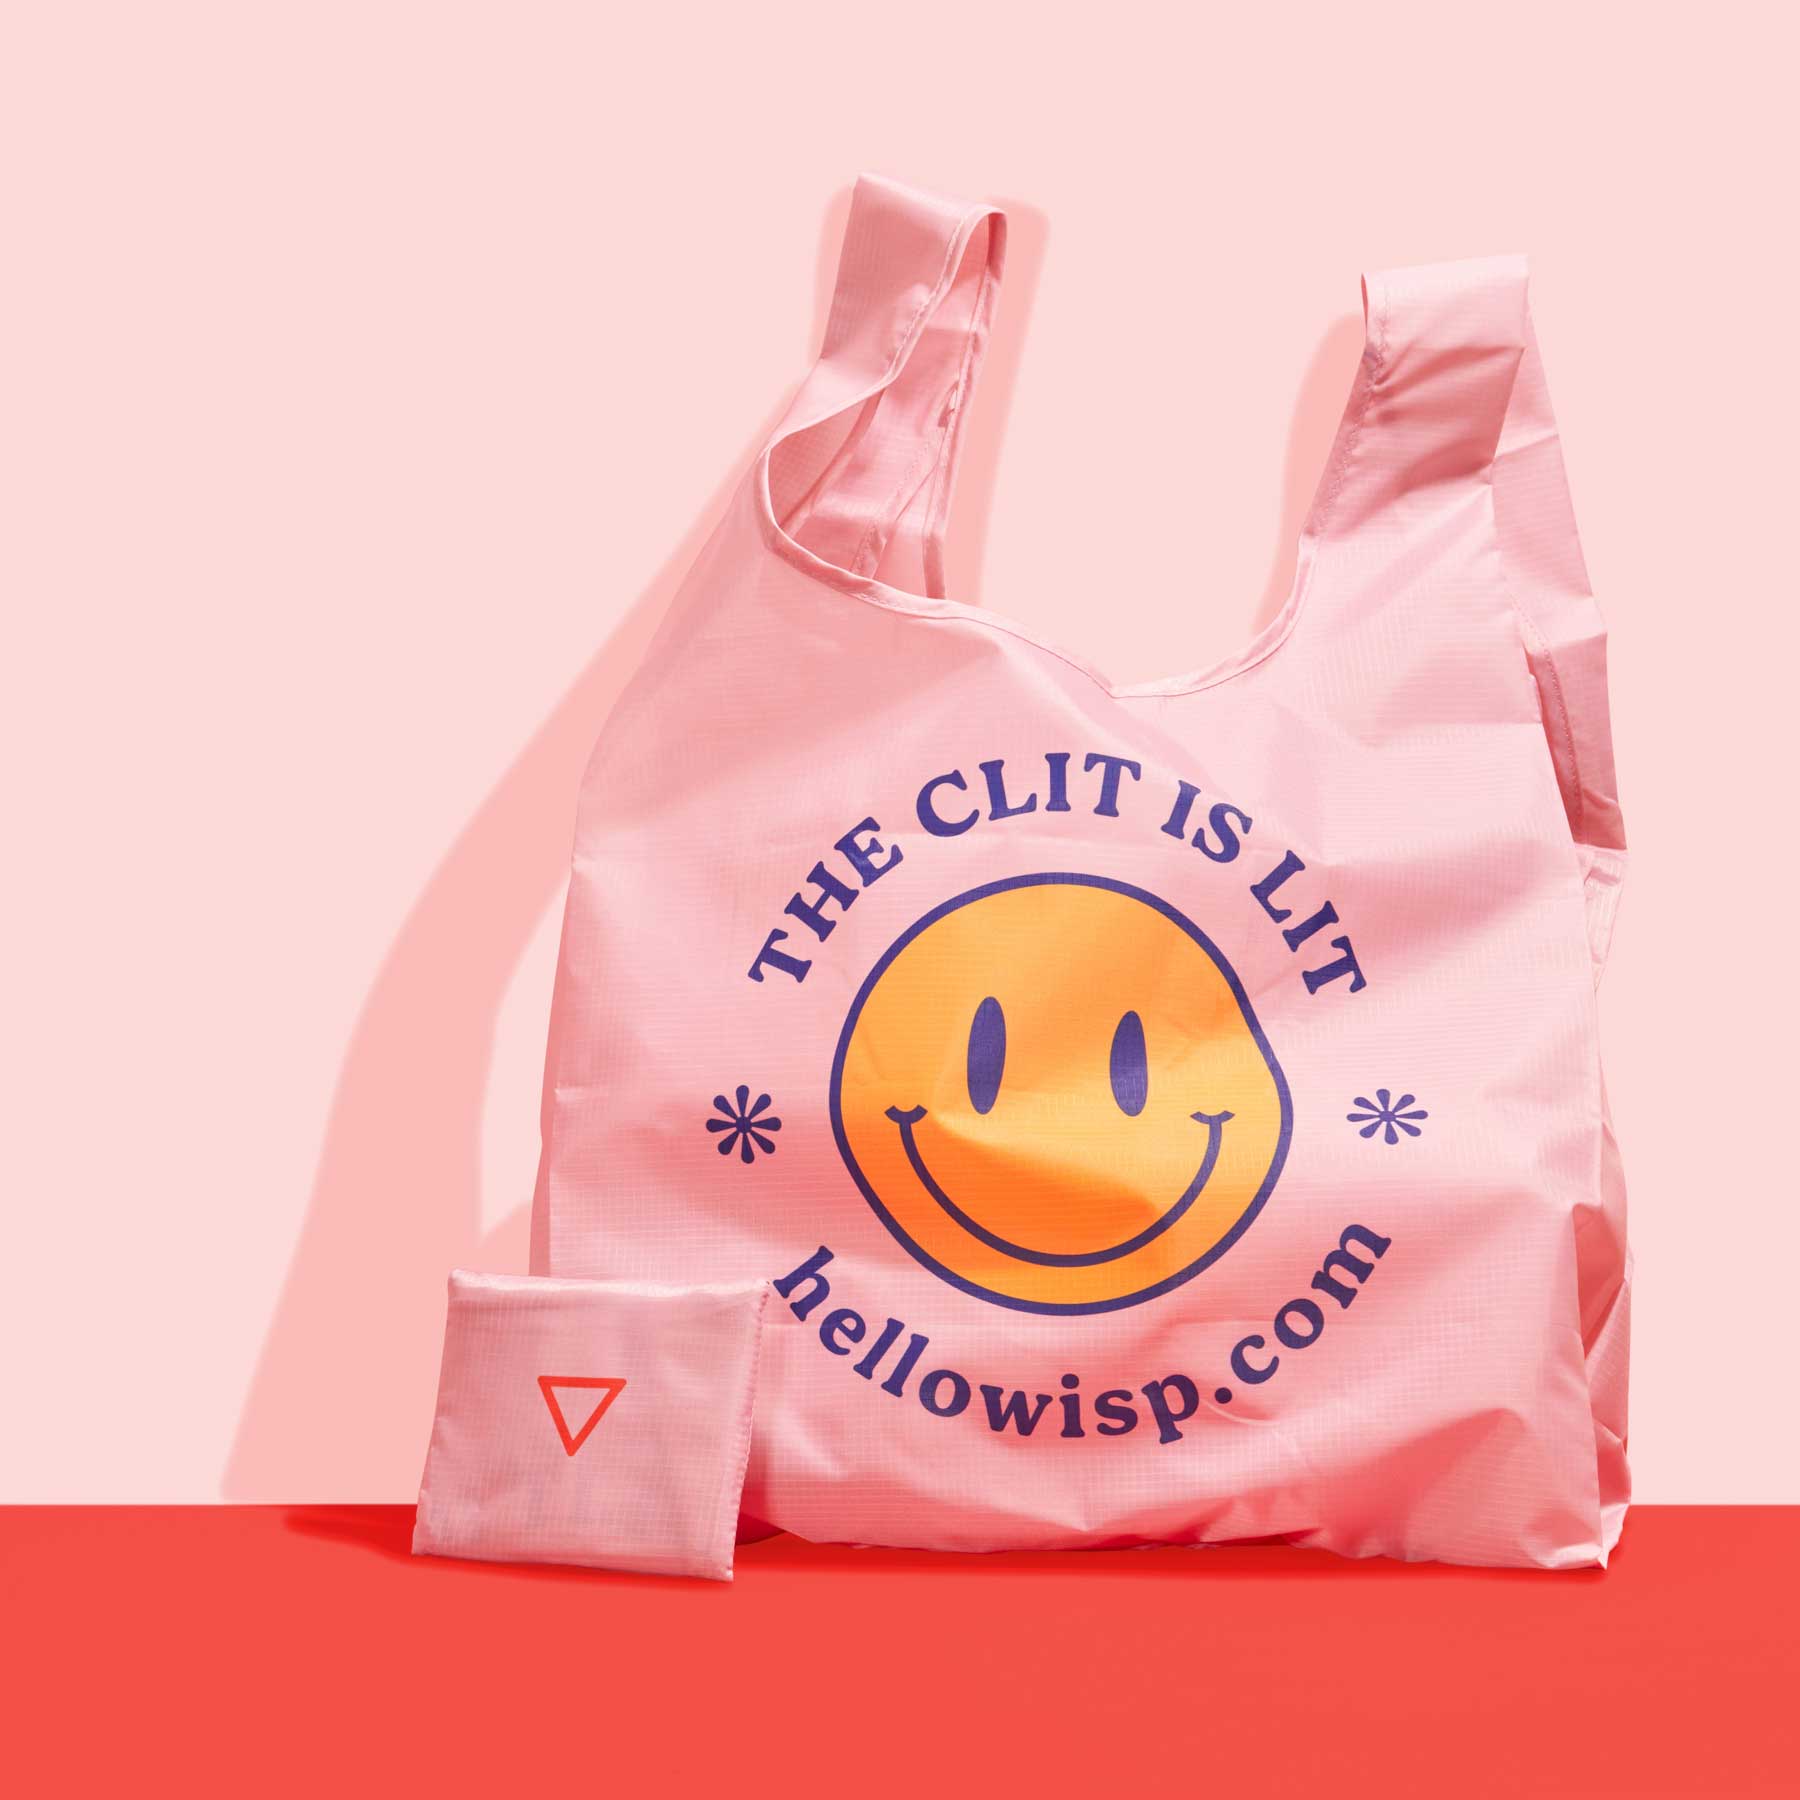 Wisp clit is lit tote on a pink and red background